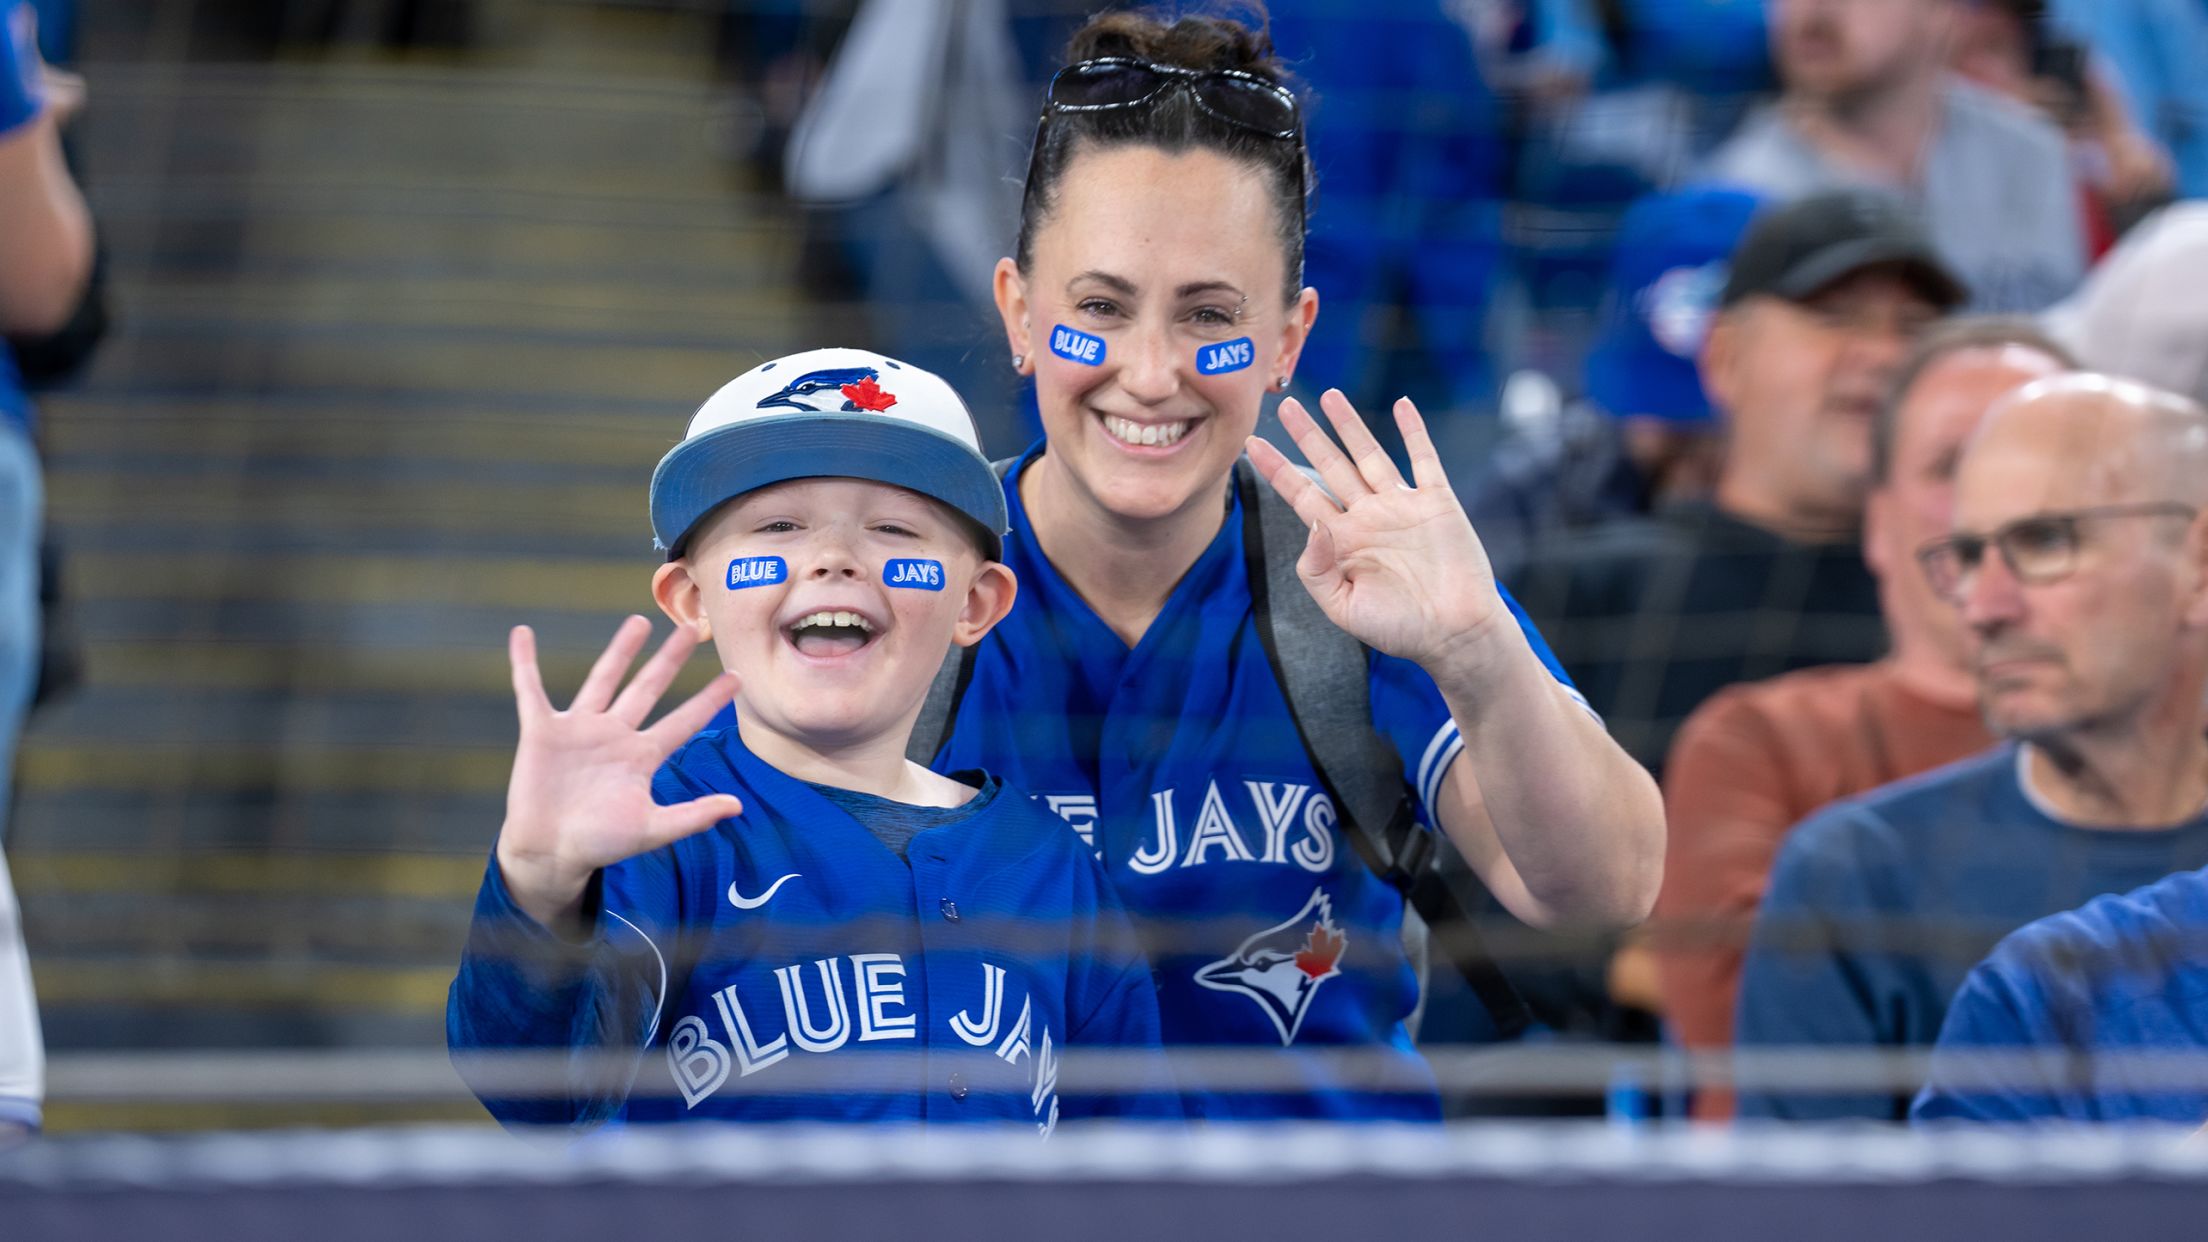 You pitch, I'll catch ⚾️ Thank you to @bluejays for having P.H.A.G Haus  back this year to help celebrate Blue Jays Pride Weekend 2023…